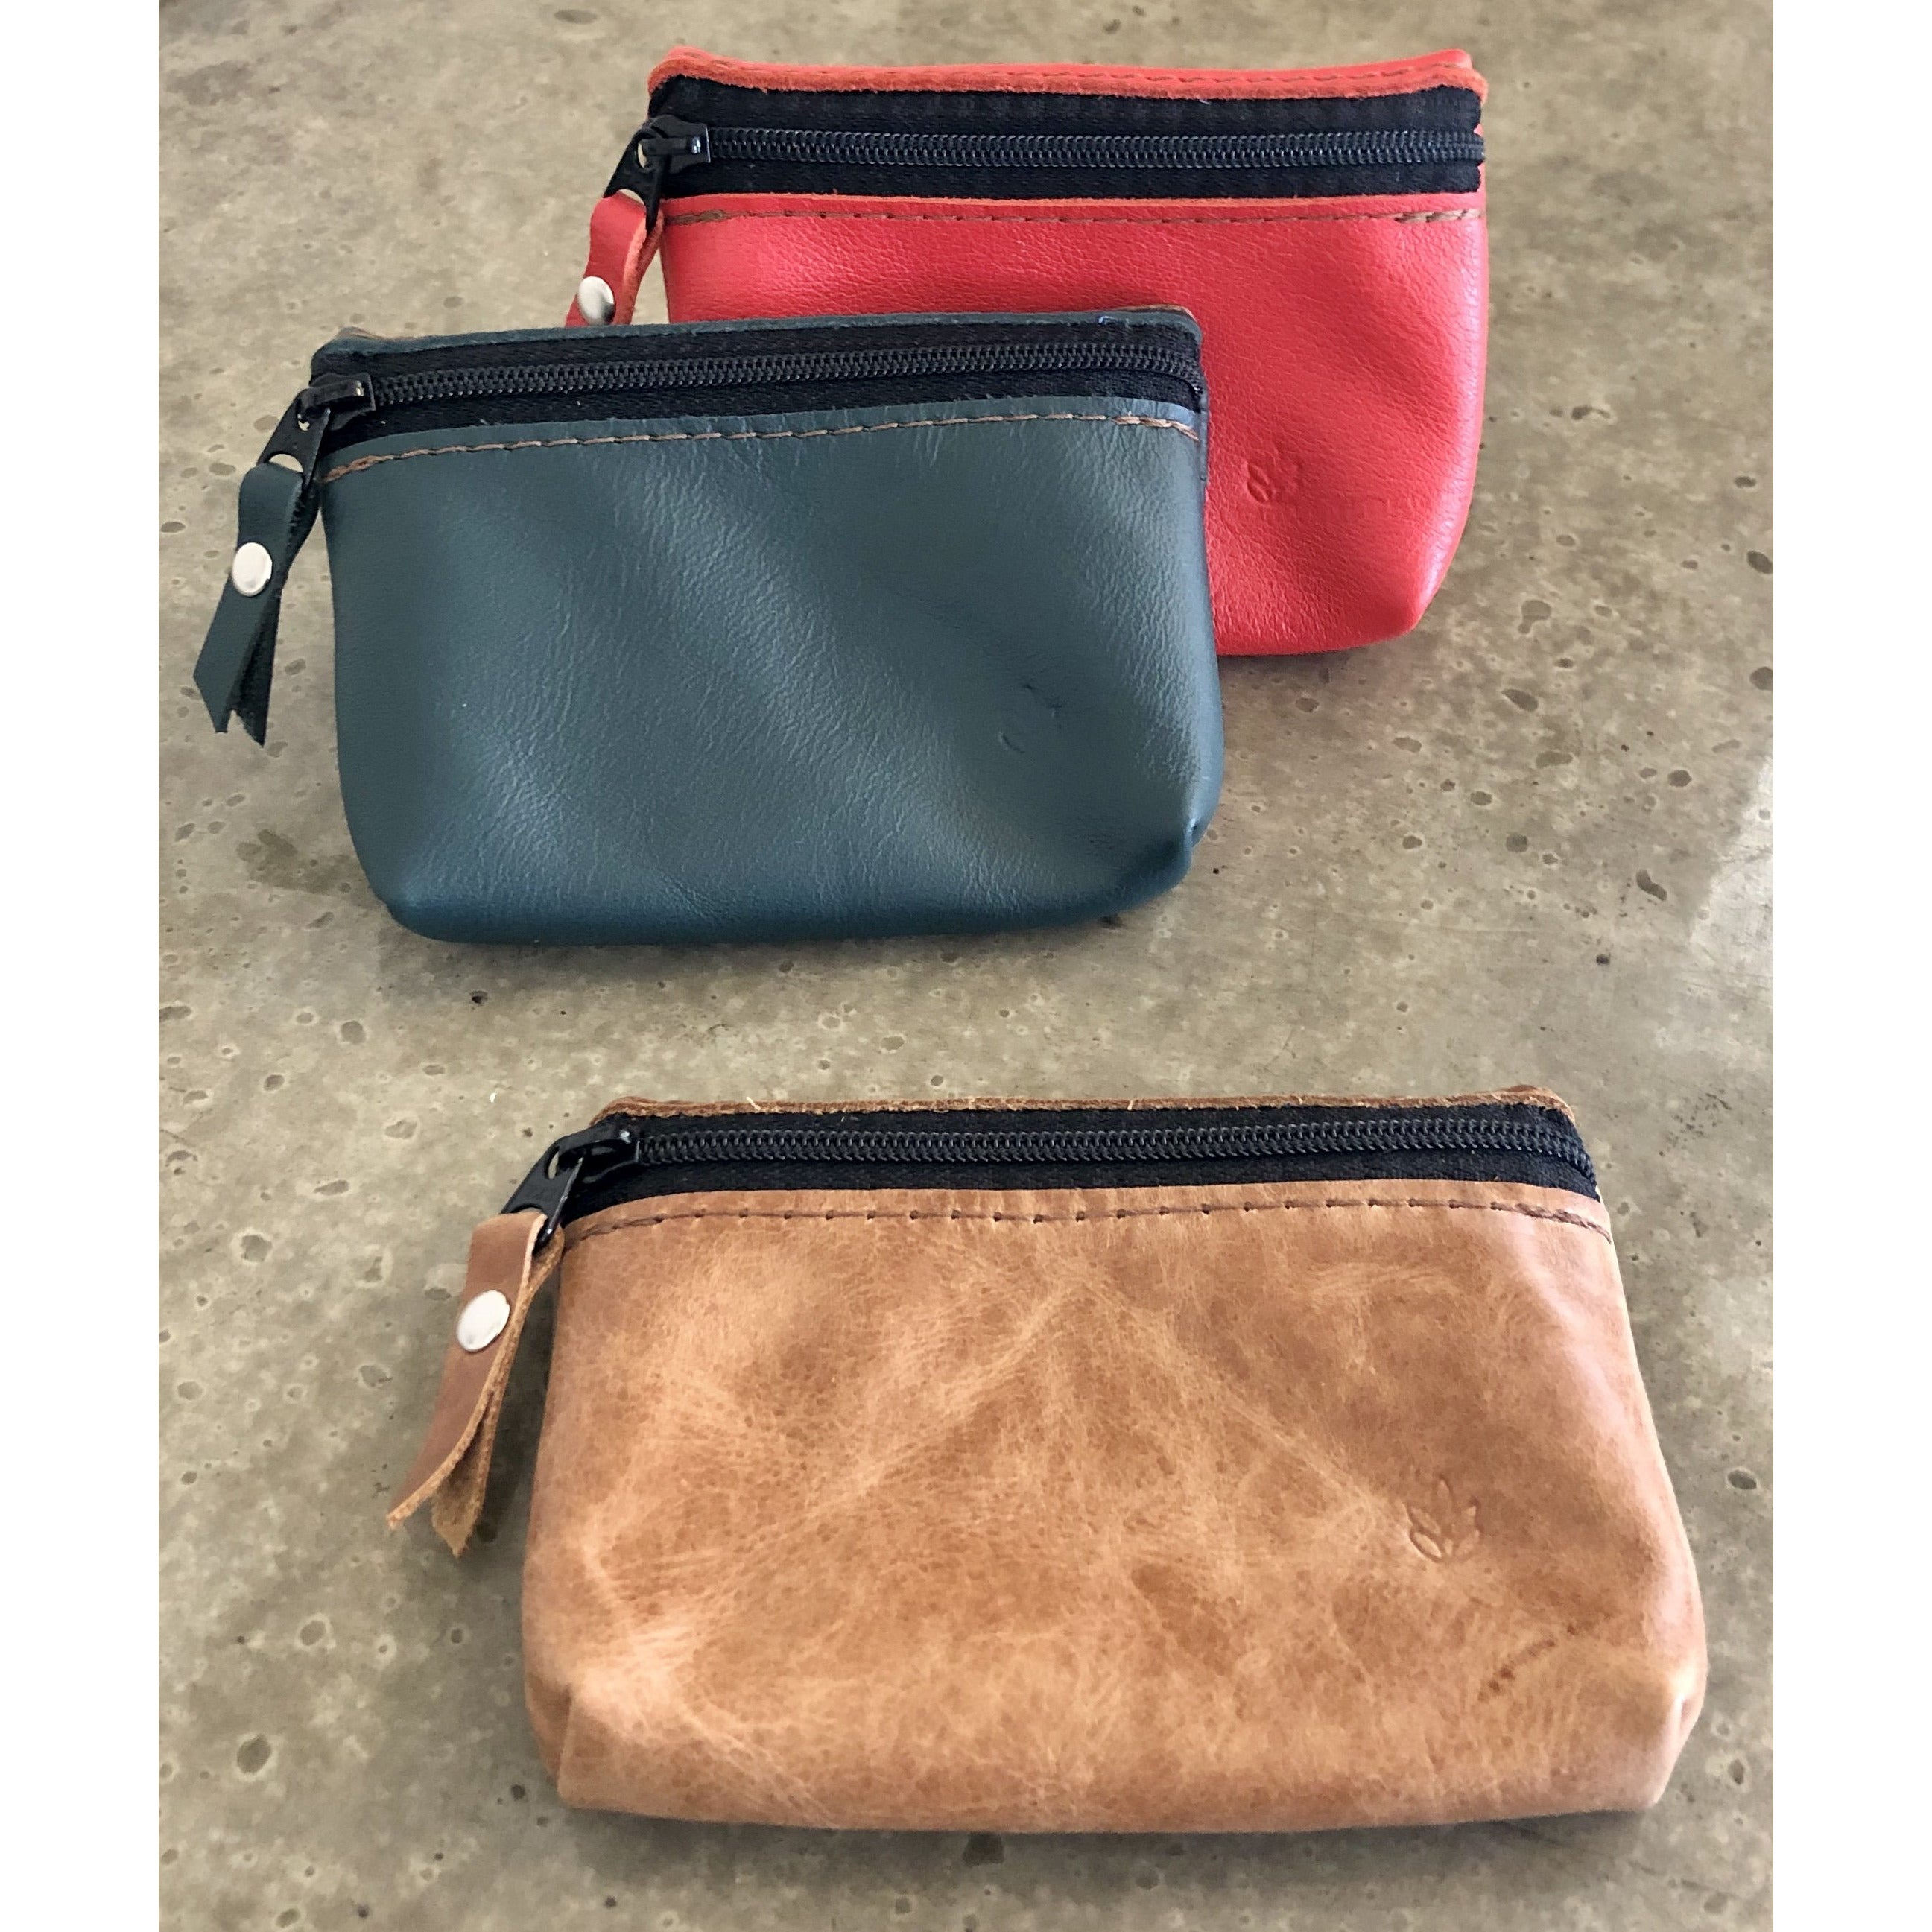 Leather zipper Pouch in beige, teal, and bright orange, with front zipper